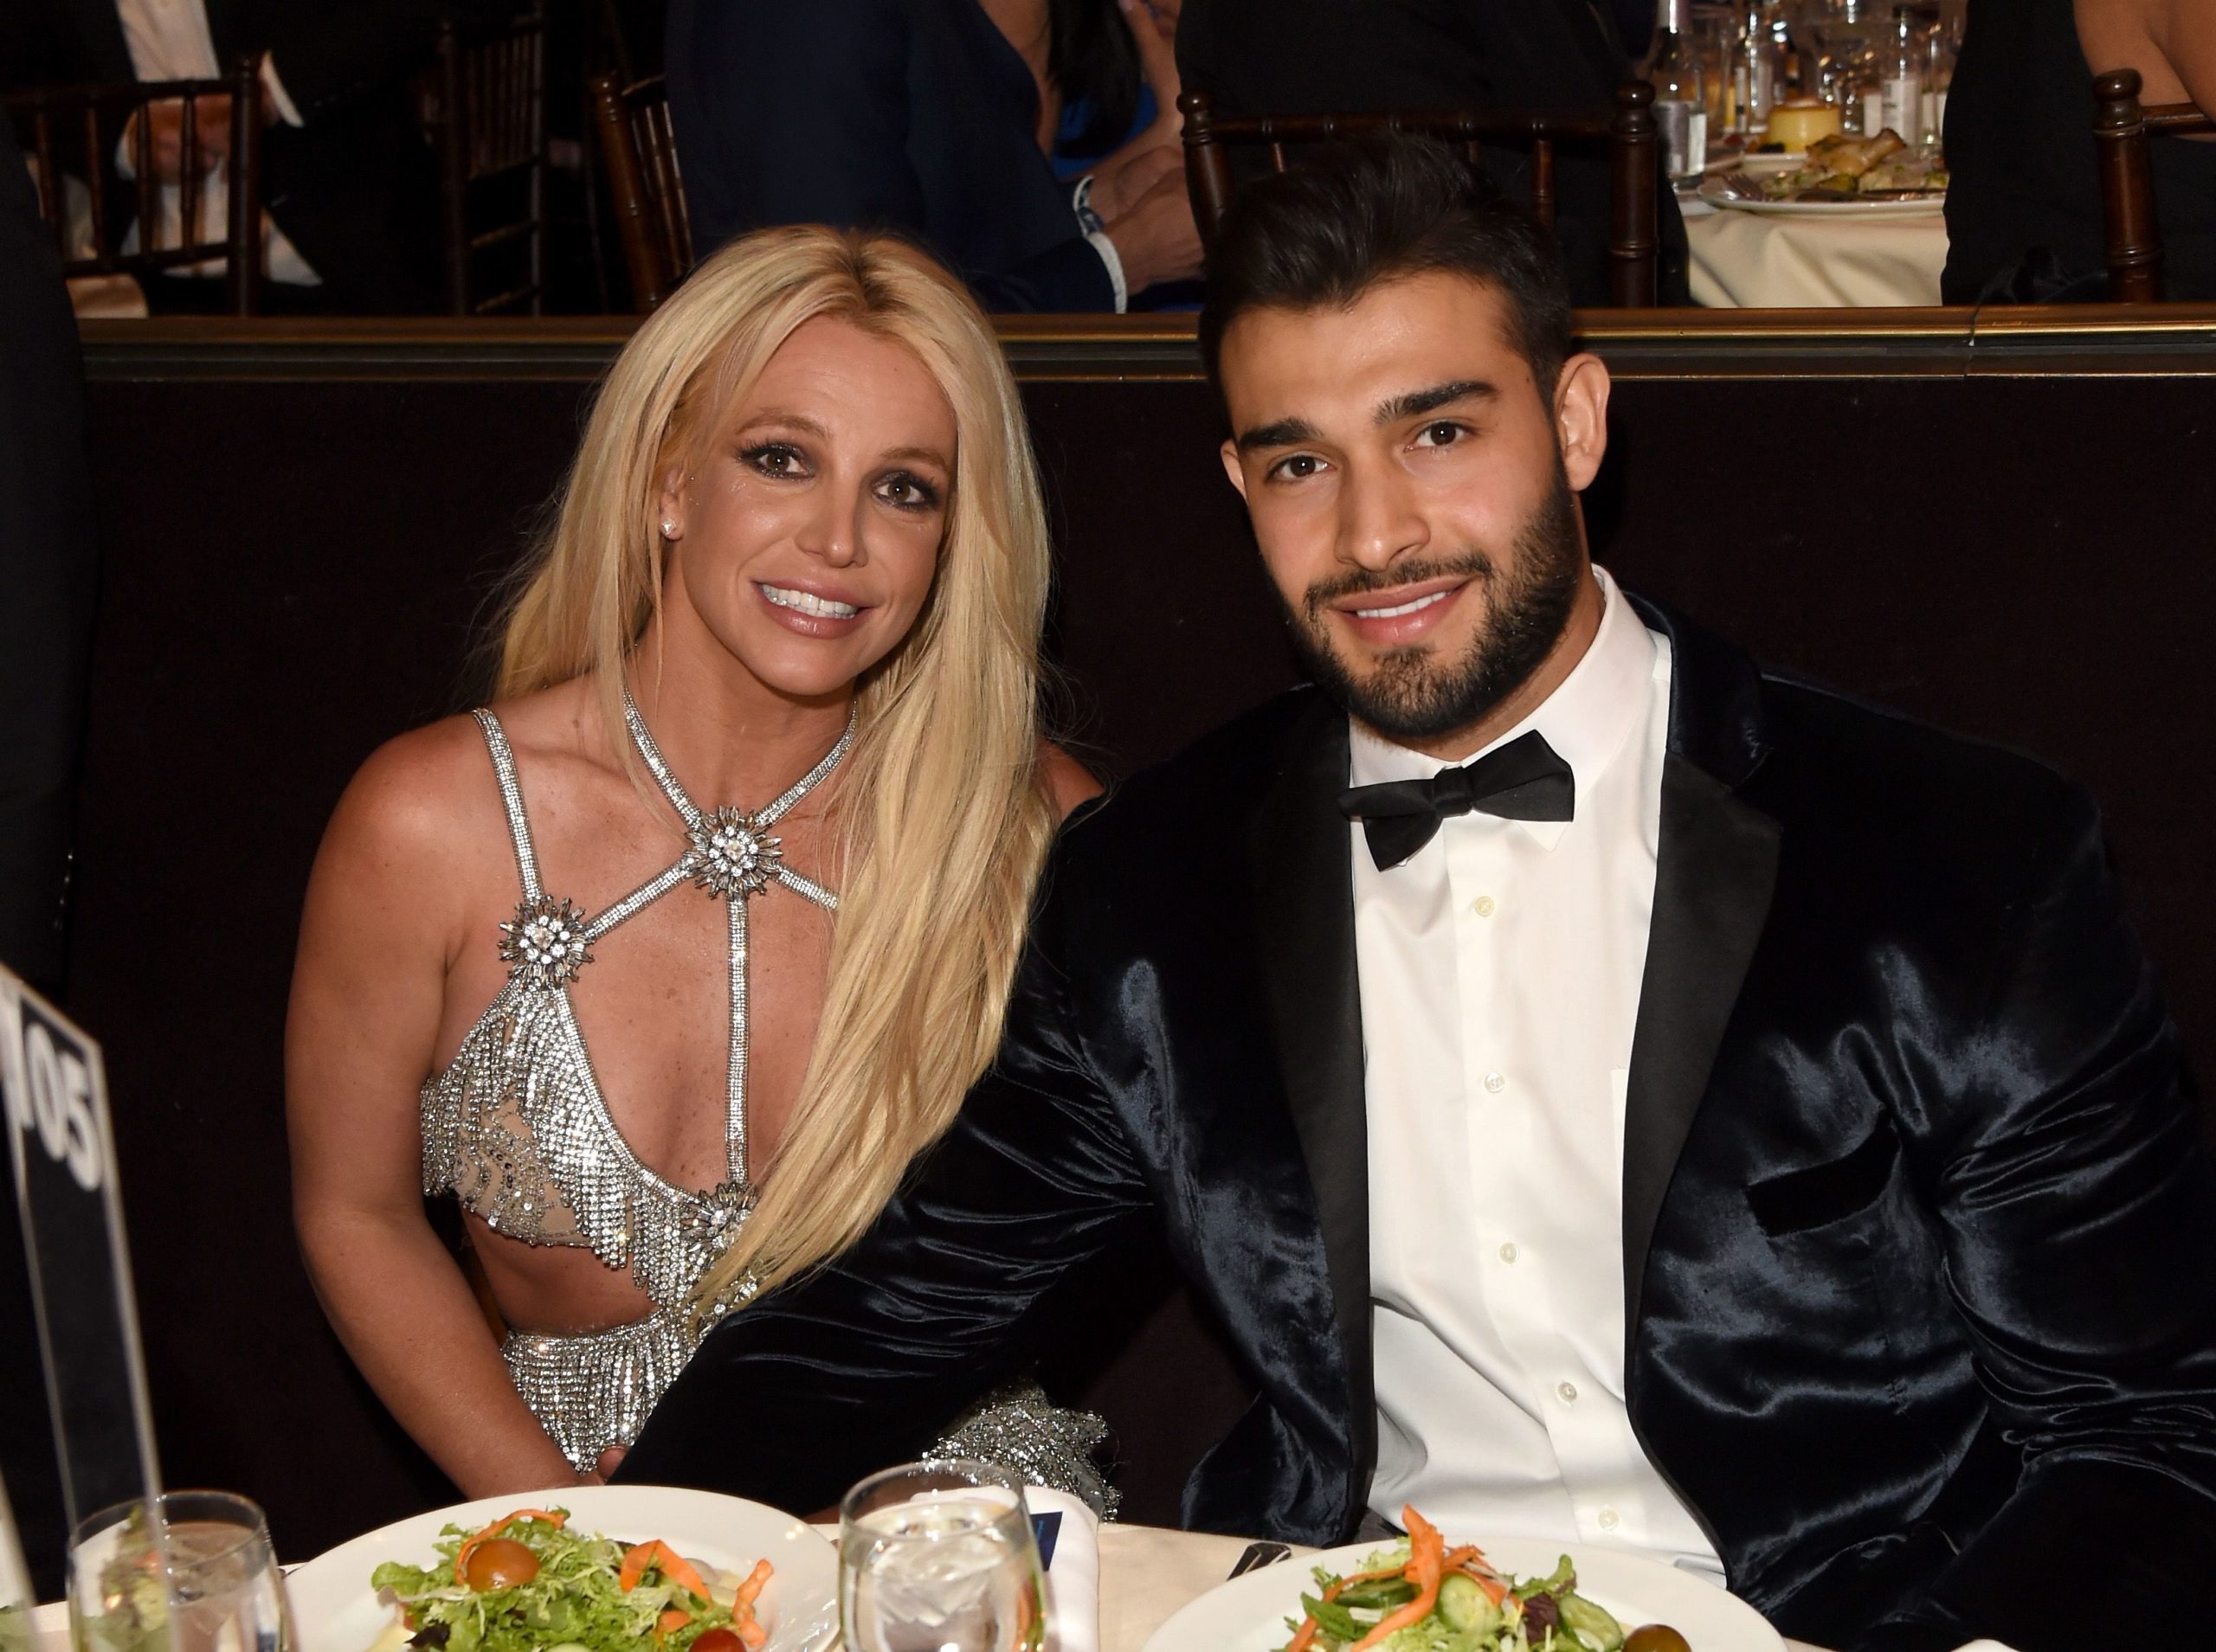 Britney Spears Gears Up For Prenup Following Her Engagement With Sam Asgahri